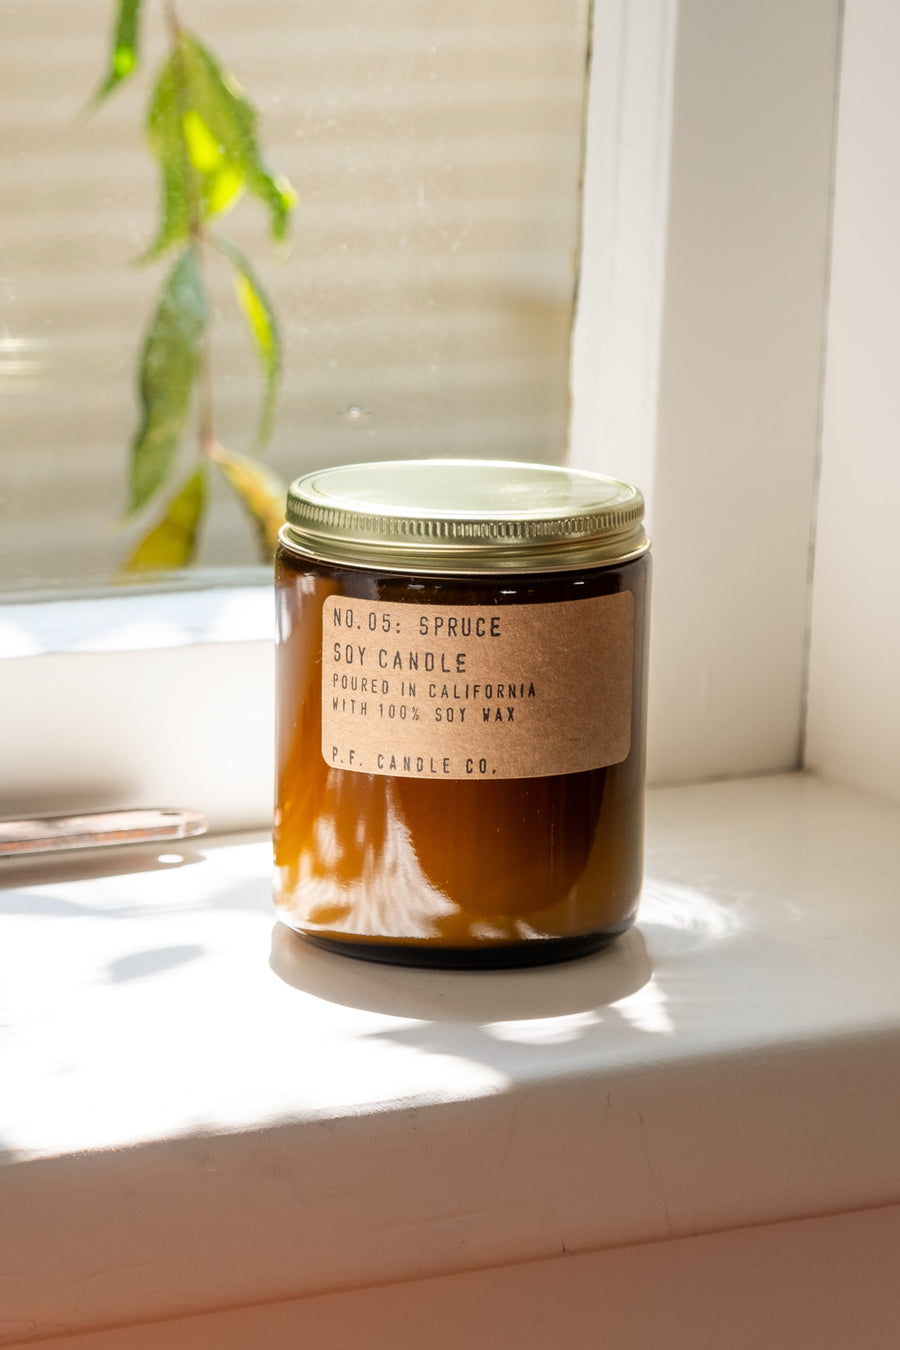 P.F. Candle Co. Standard Soy Candle - Spruce